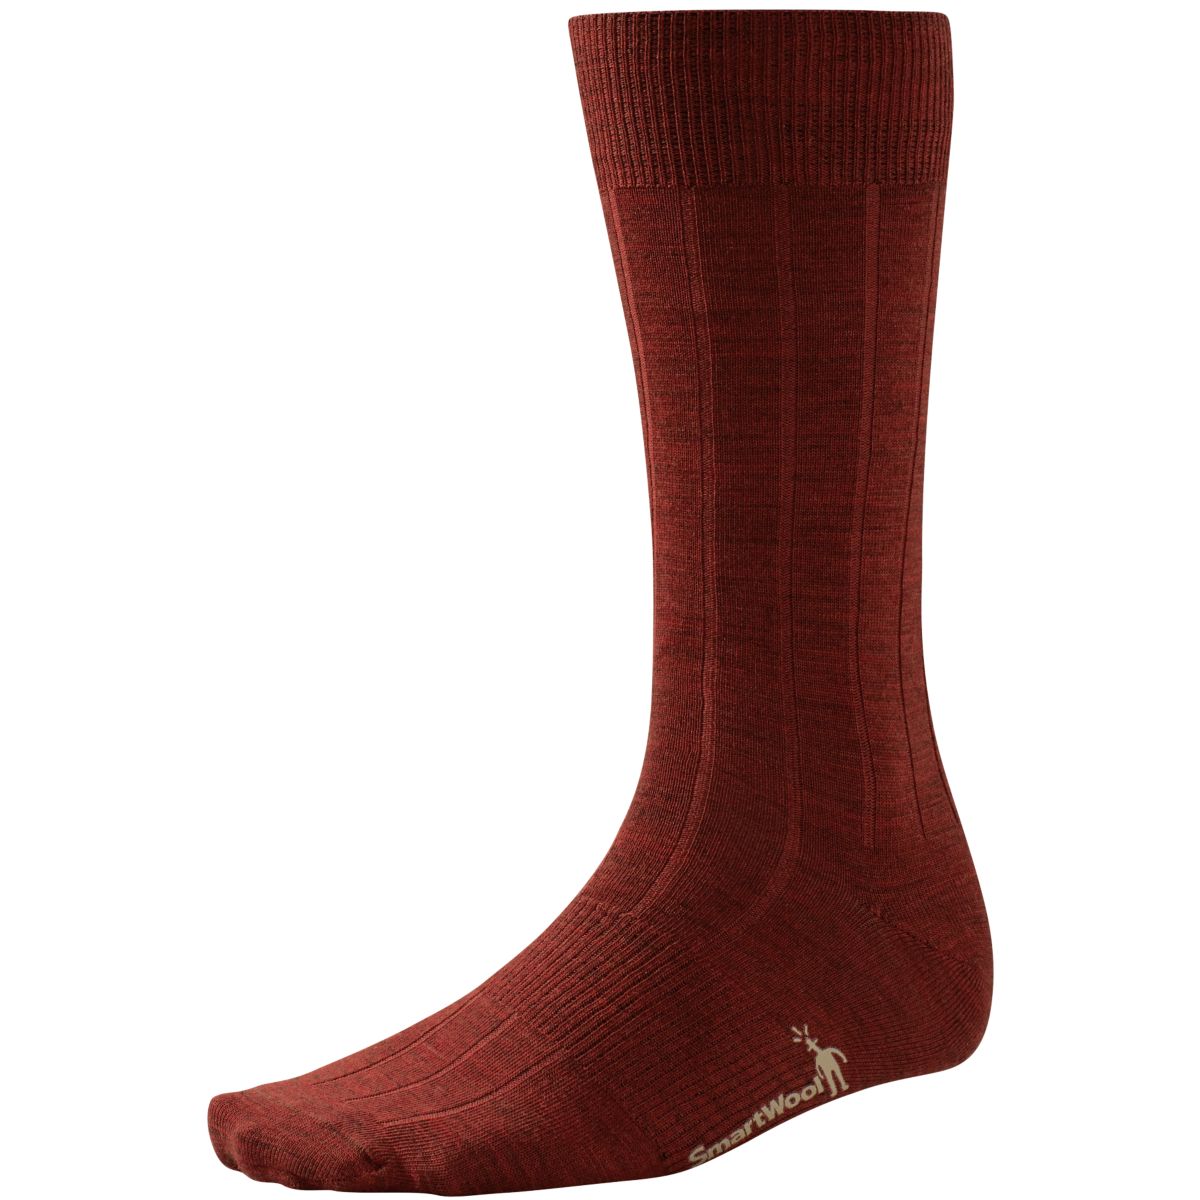 SmartWool Men's City Slicker Discontinued Pricing